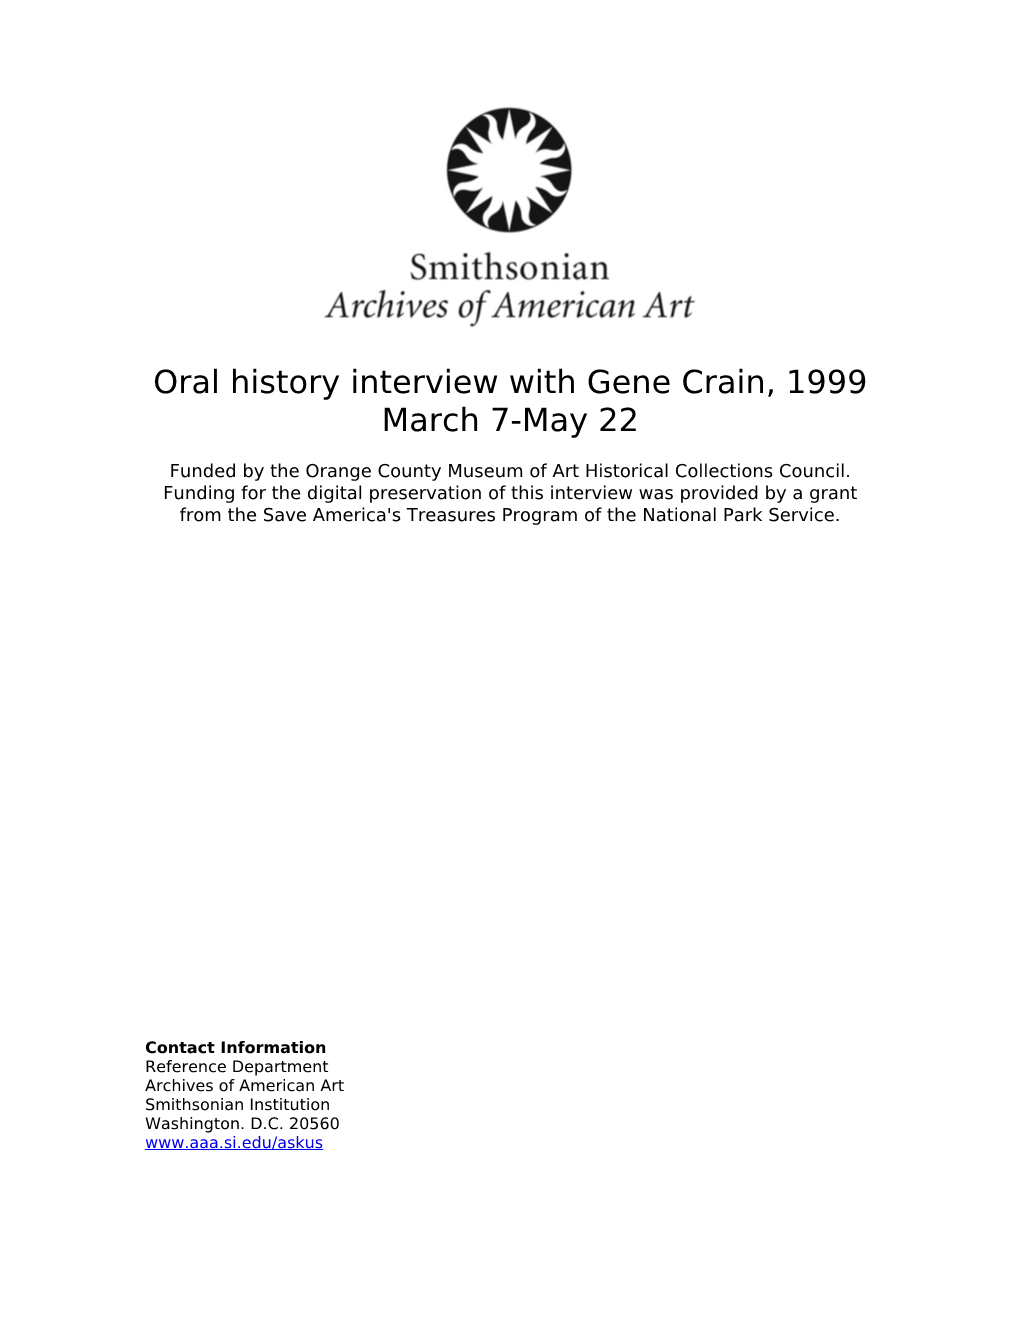 Oral History Interview with Gene Crain, 1999 March 7-May 22